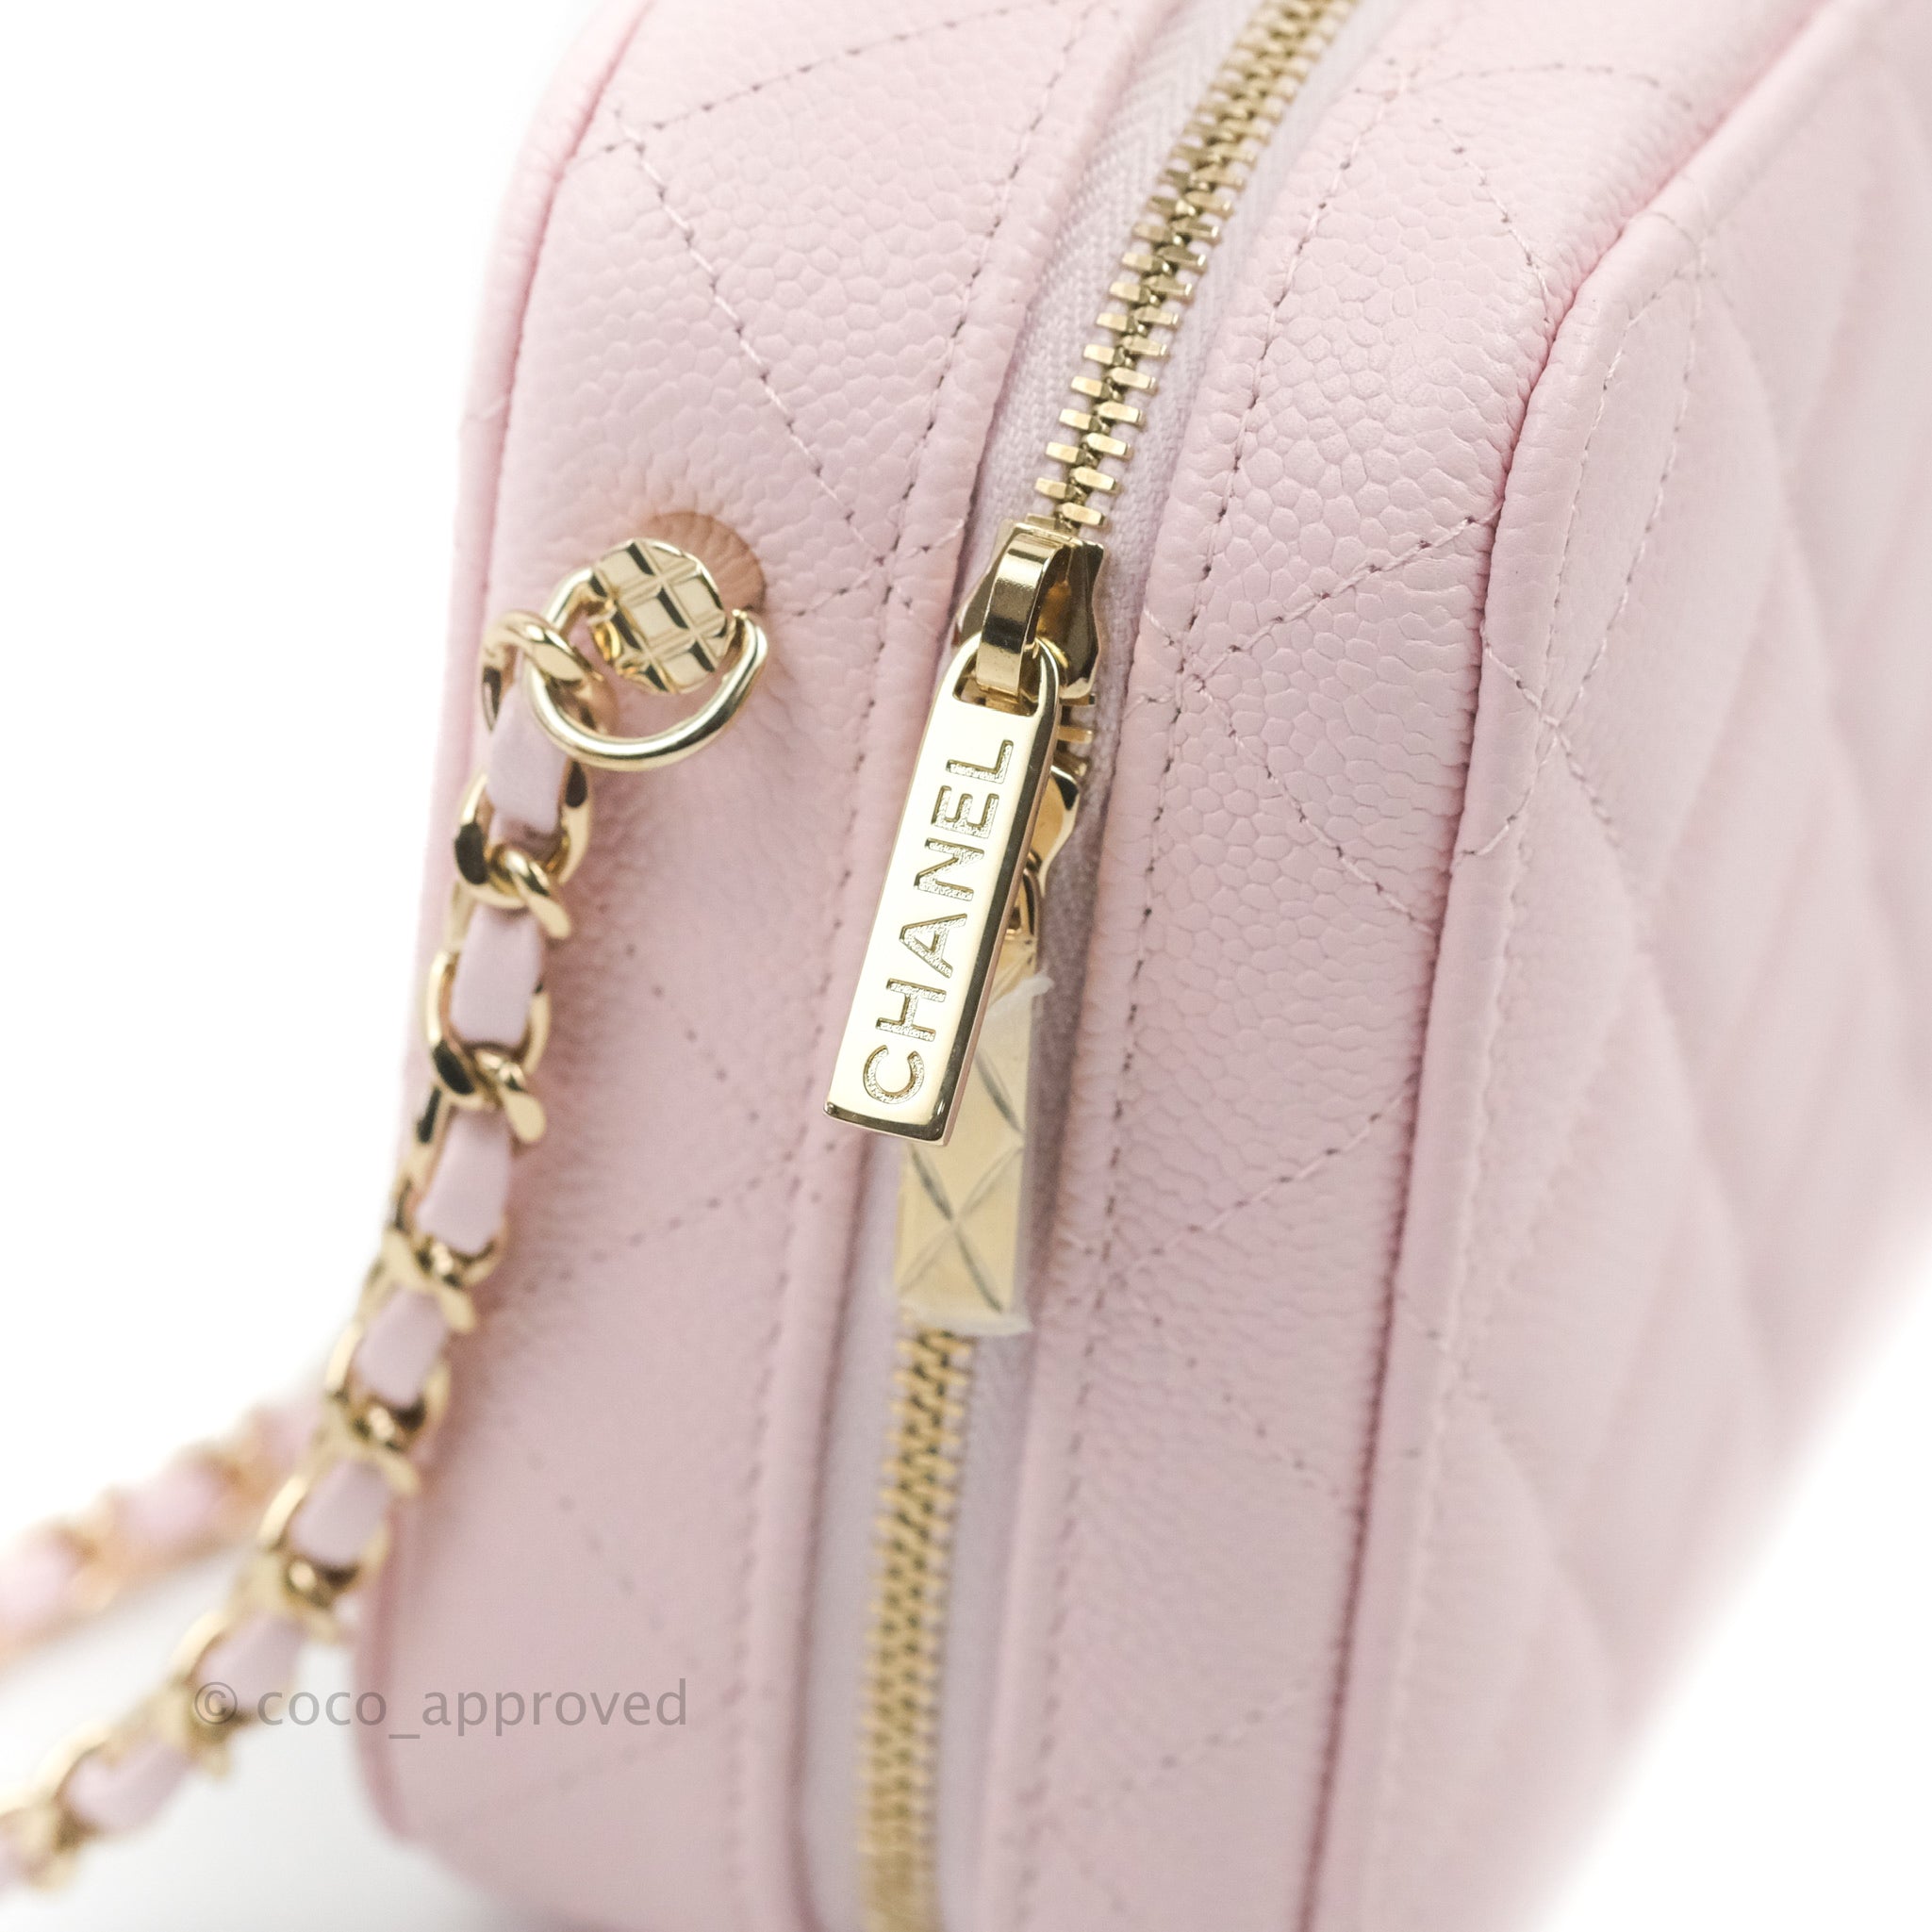 Chanel Small Quilted Vanity Case - Pink Handle Bags, Handbags